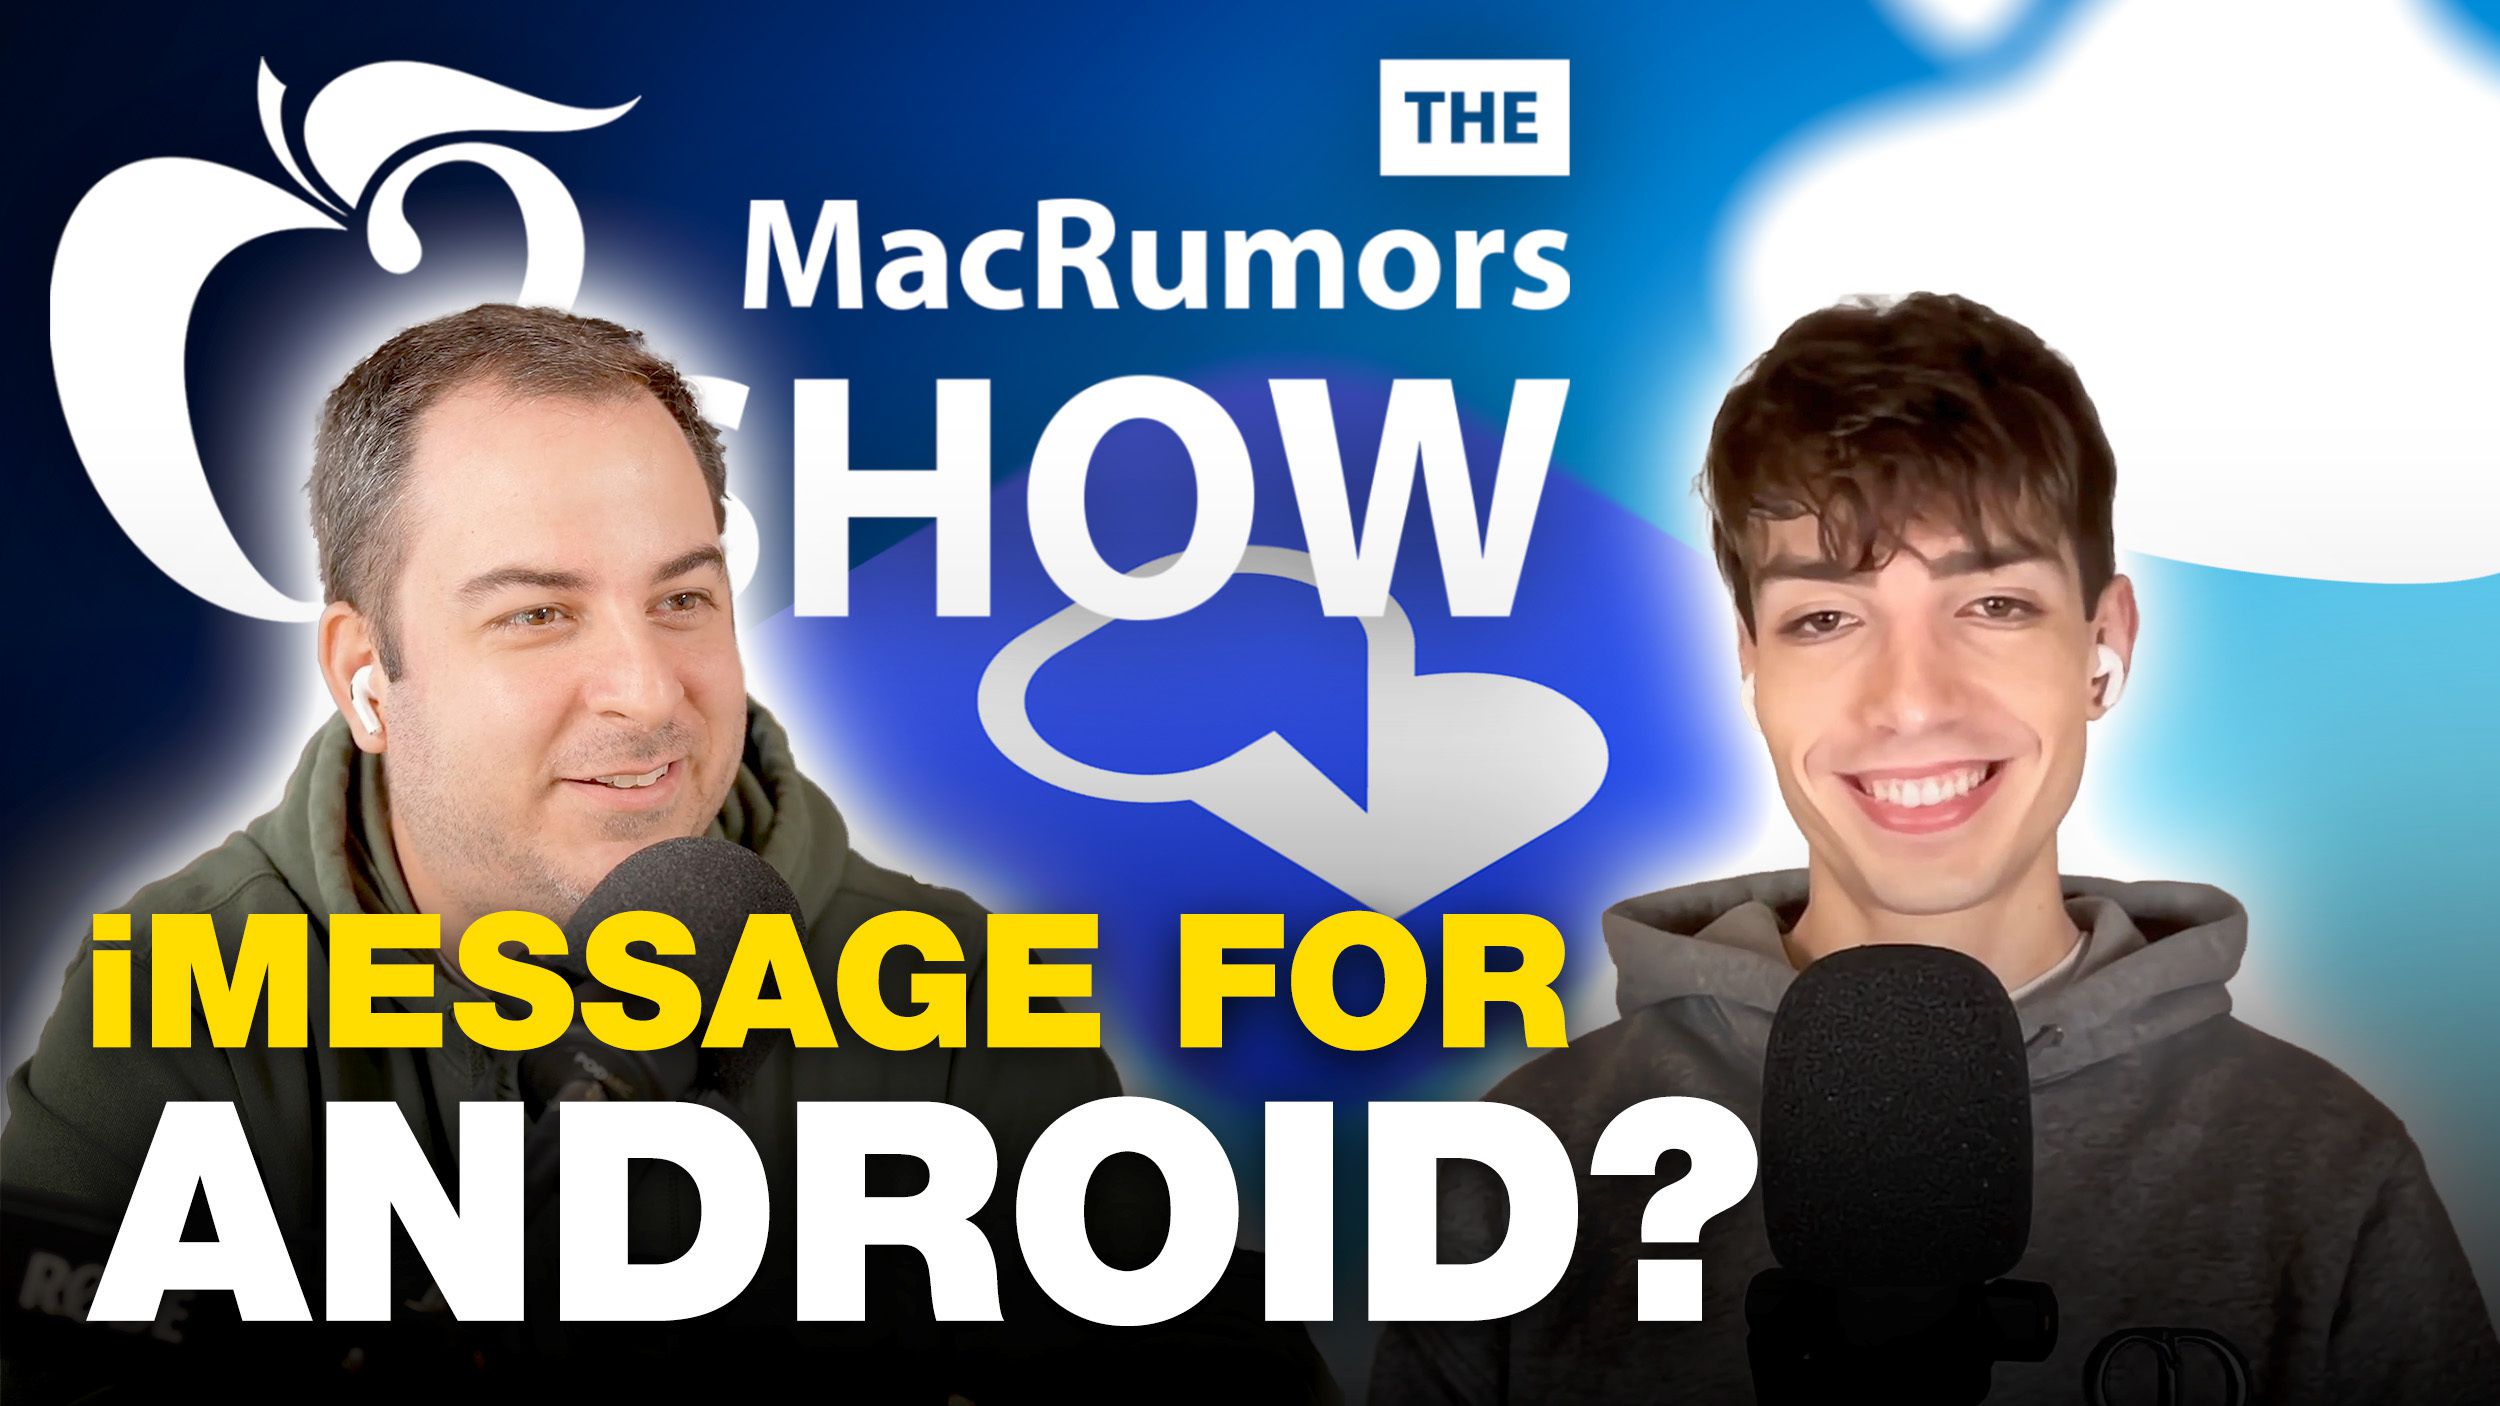 The MacRumors Show: Should Apple Allow iMessage for Android?